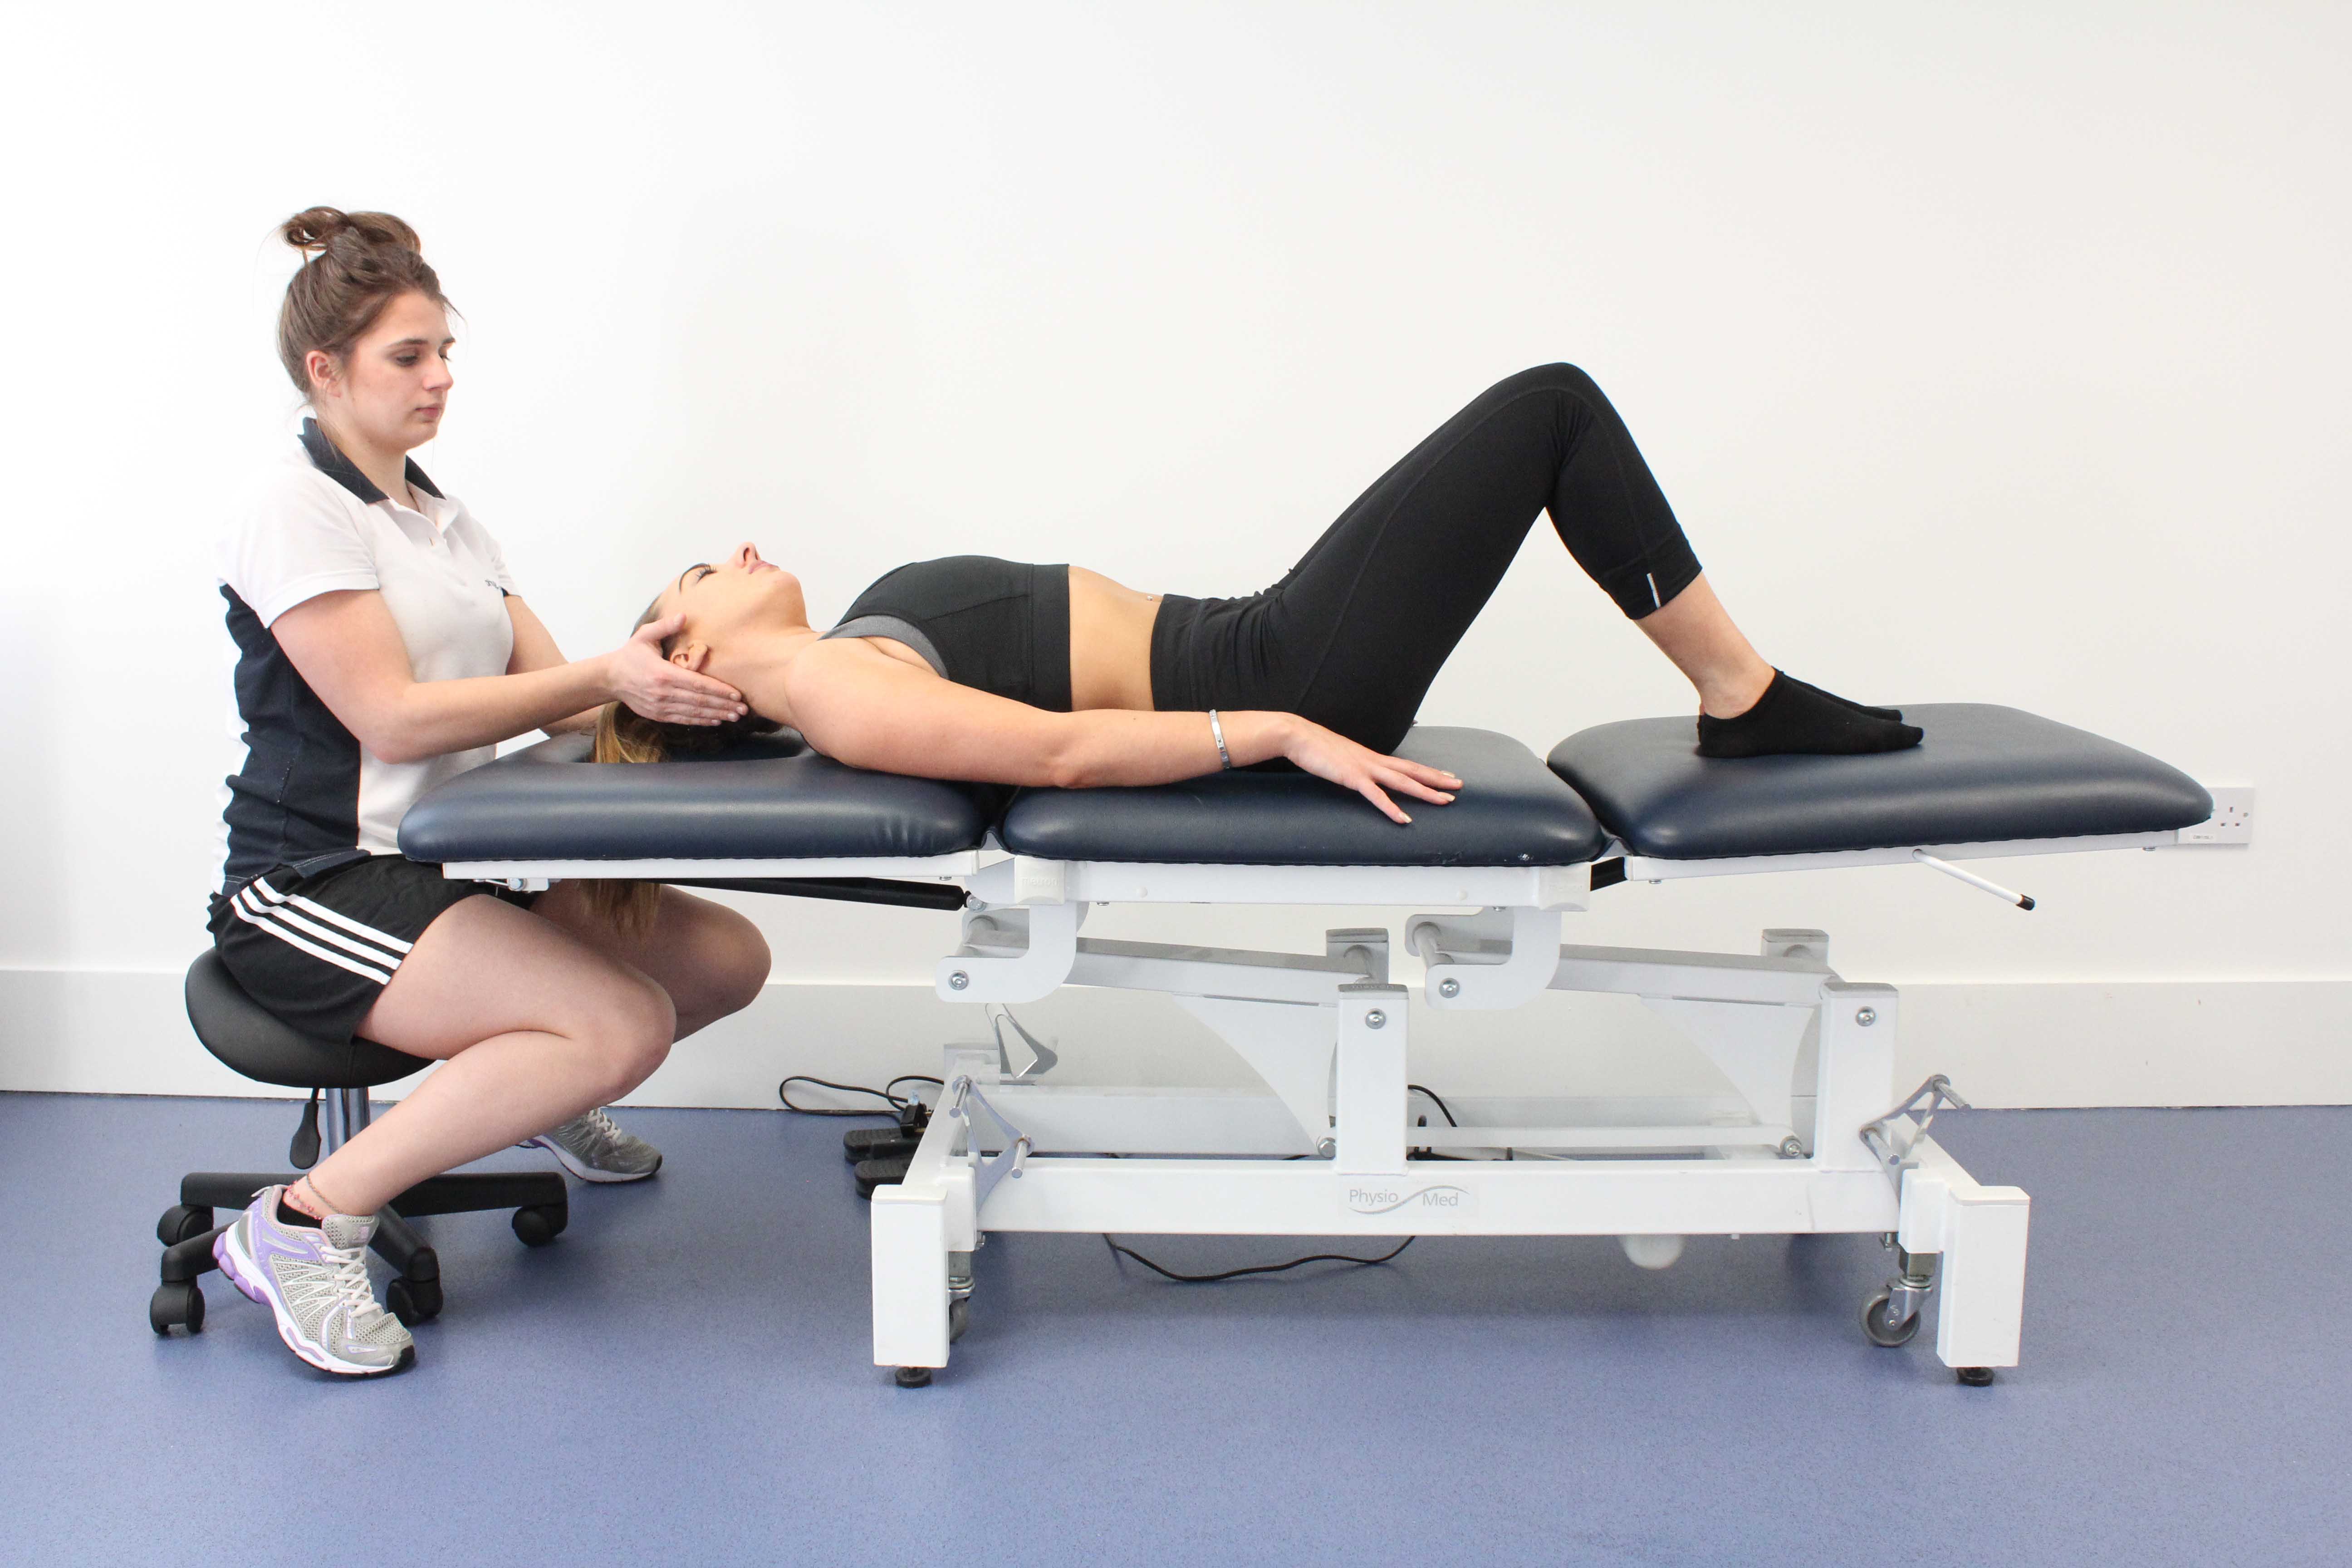 Physiotherapist performing postural realignment exercises to correct vestibular balance and dizziness conditions